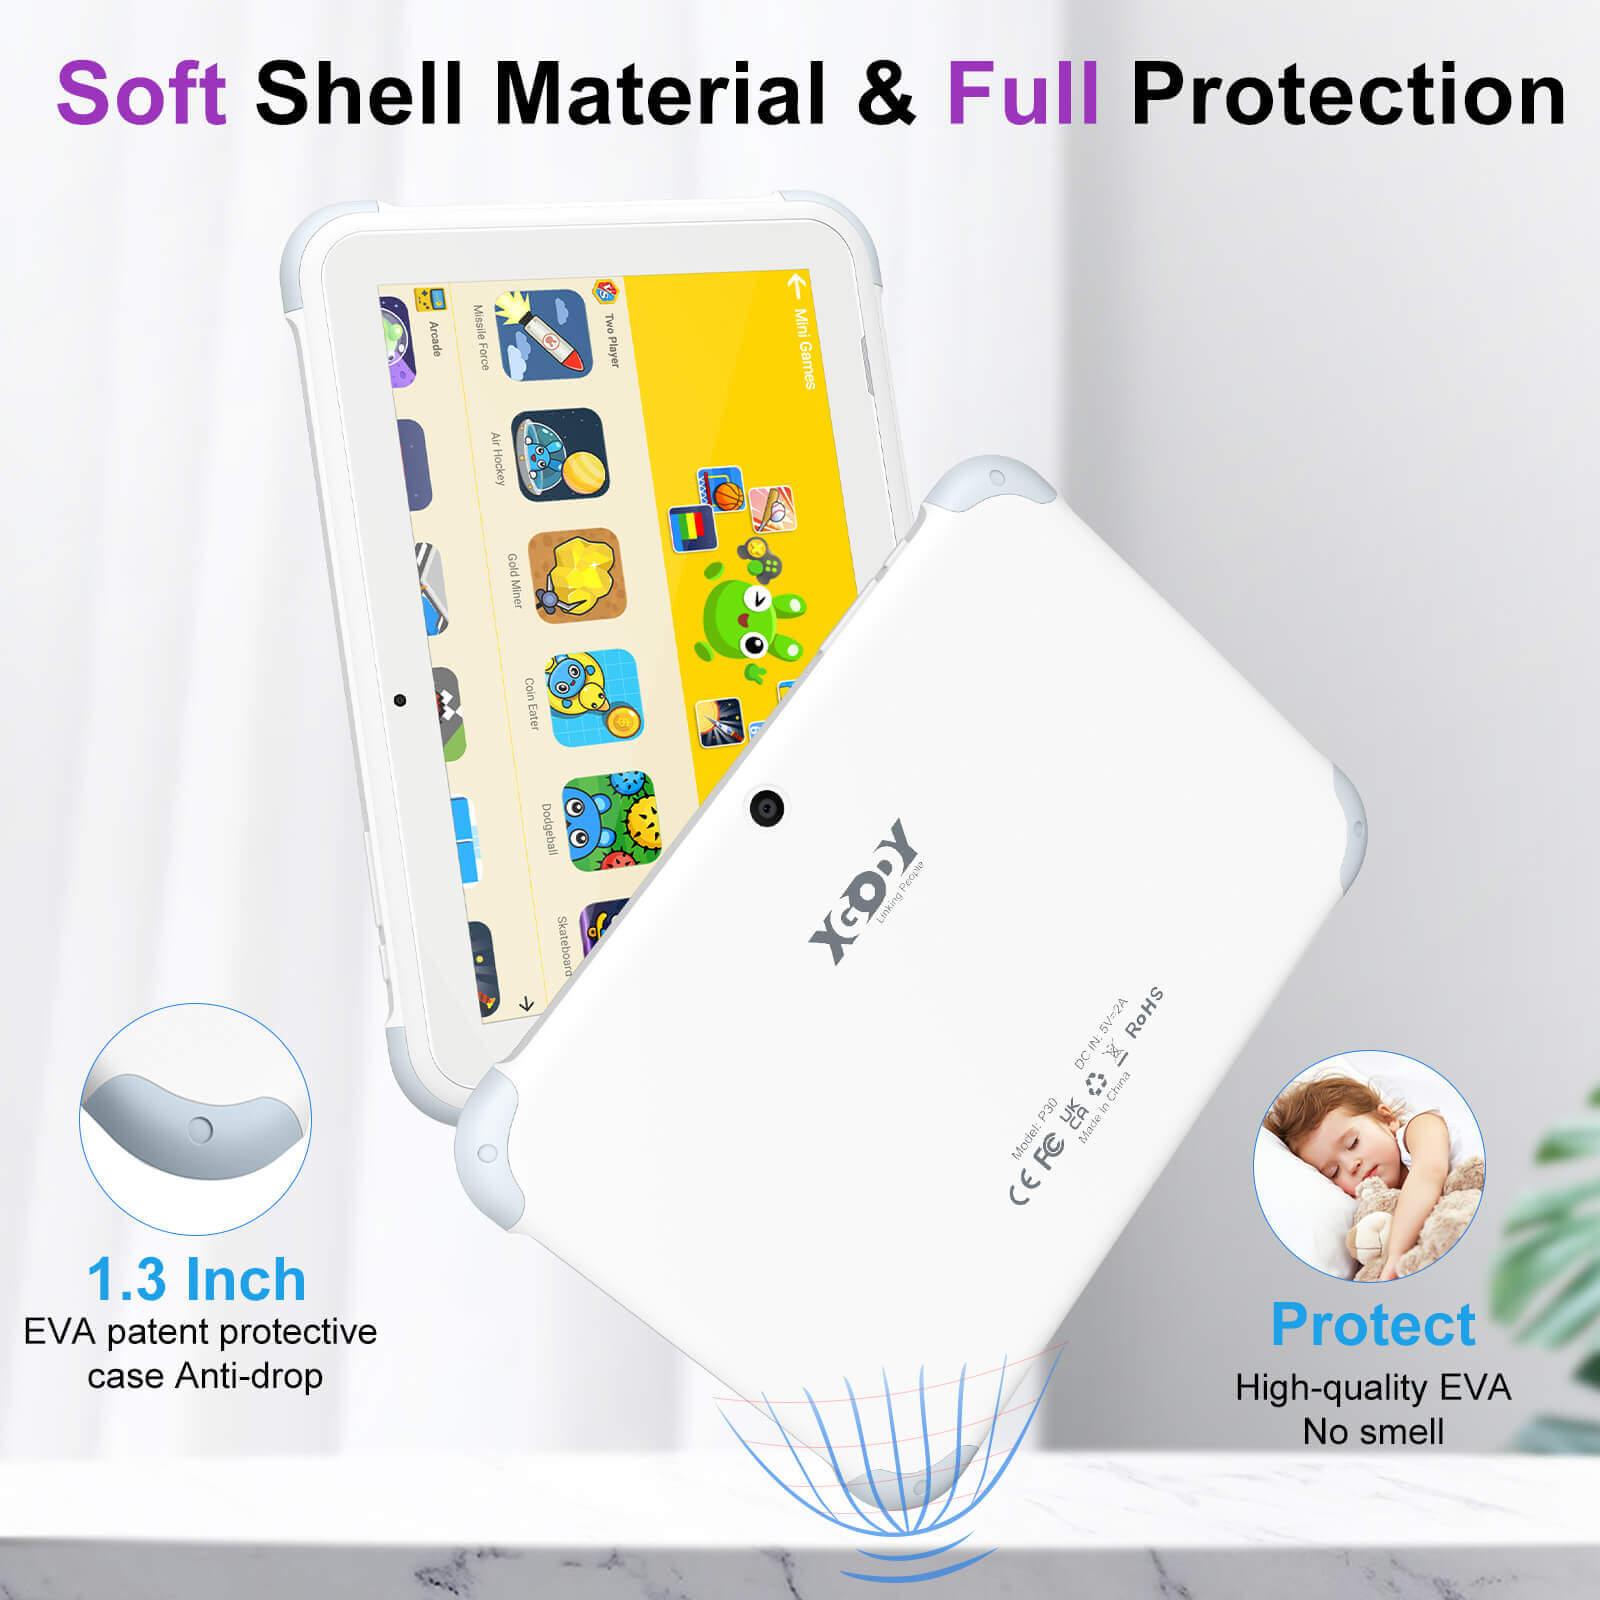 Cost-effective and Most worthwhile XGODY P30 Dual SIM 4G 1.3Hz Quad Core Processer 8 Inch HD Screen Tablet For Kids - XGODY 